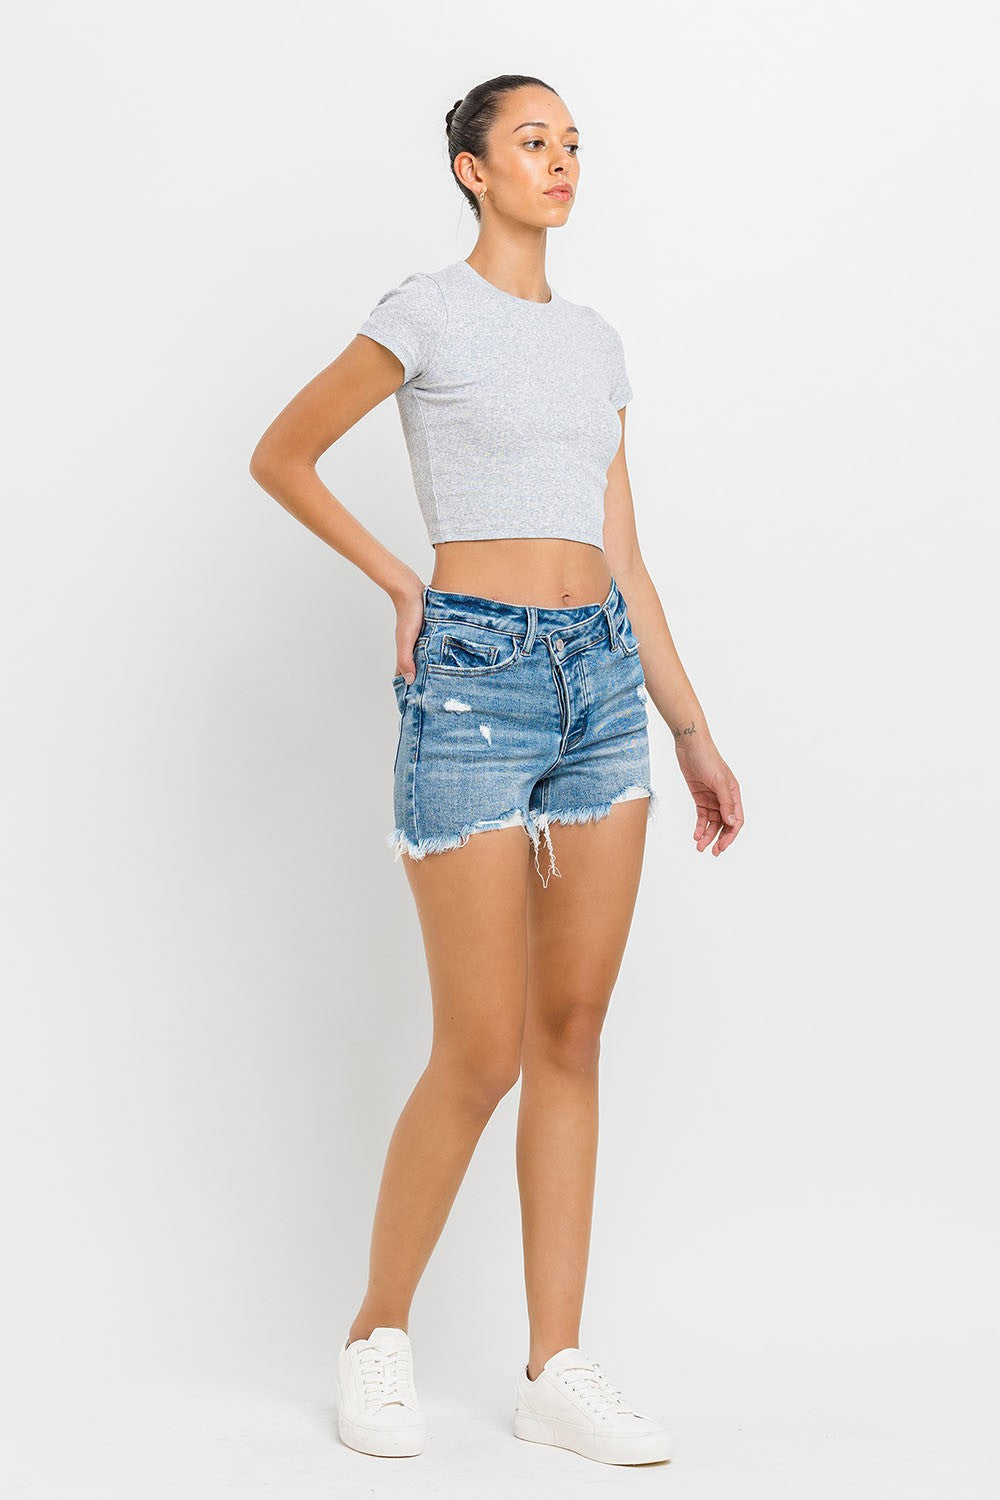 These stepped waist raw hem denim shorts are a chic and trendy addition to your summer wardrobe. The stepped waist design adds a unique twist to the classic denim shorts silhouette. The raw hem detail gives these shorts a cool, laid-back vibe. Pair them with a tucked-in tank top and sandals for a casual, effortless look. 